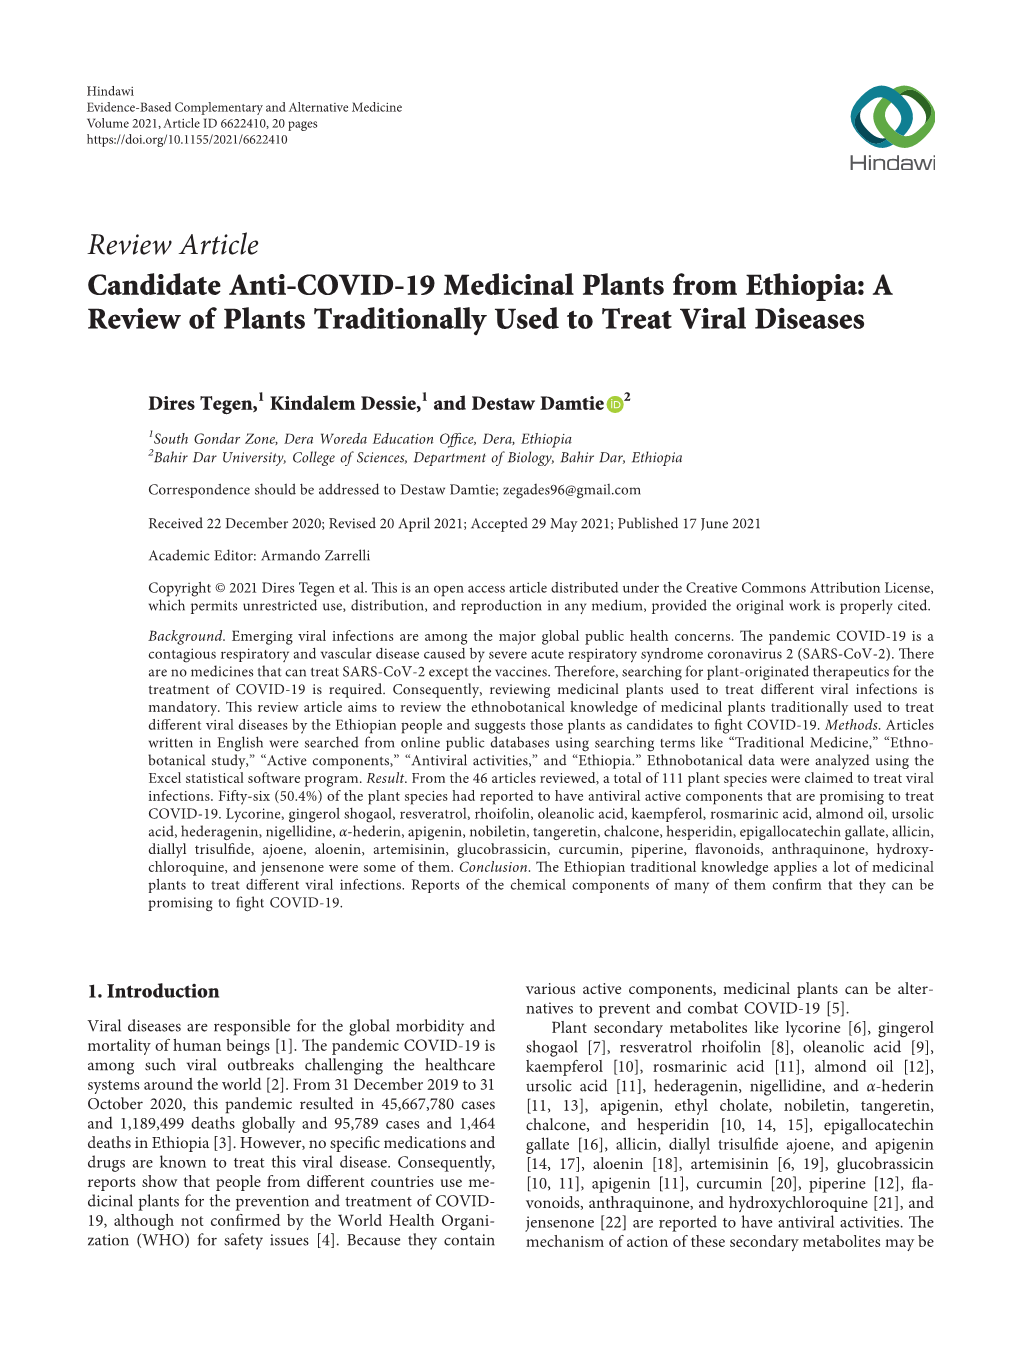 Candidate Anti-COVID-19 Medicinal Plants from Ethiopia: a Review of Plants Traditionally Used to Treat Viral Diseases